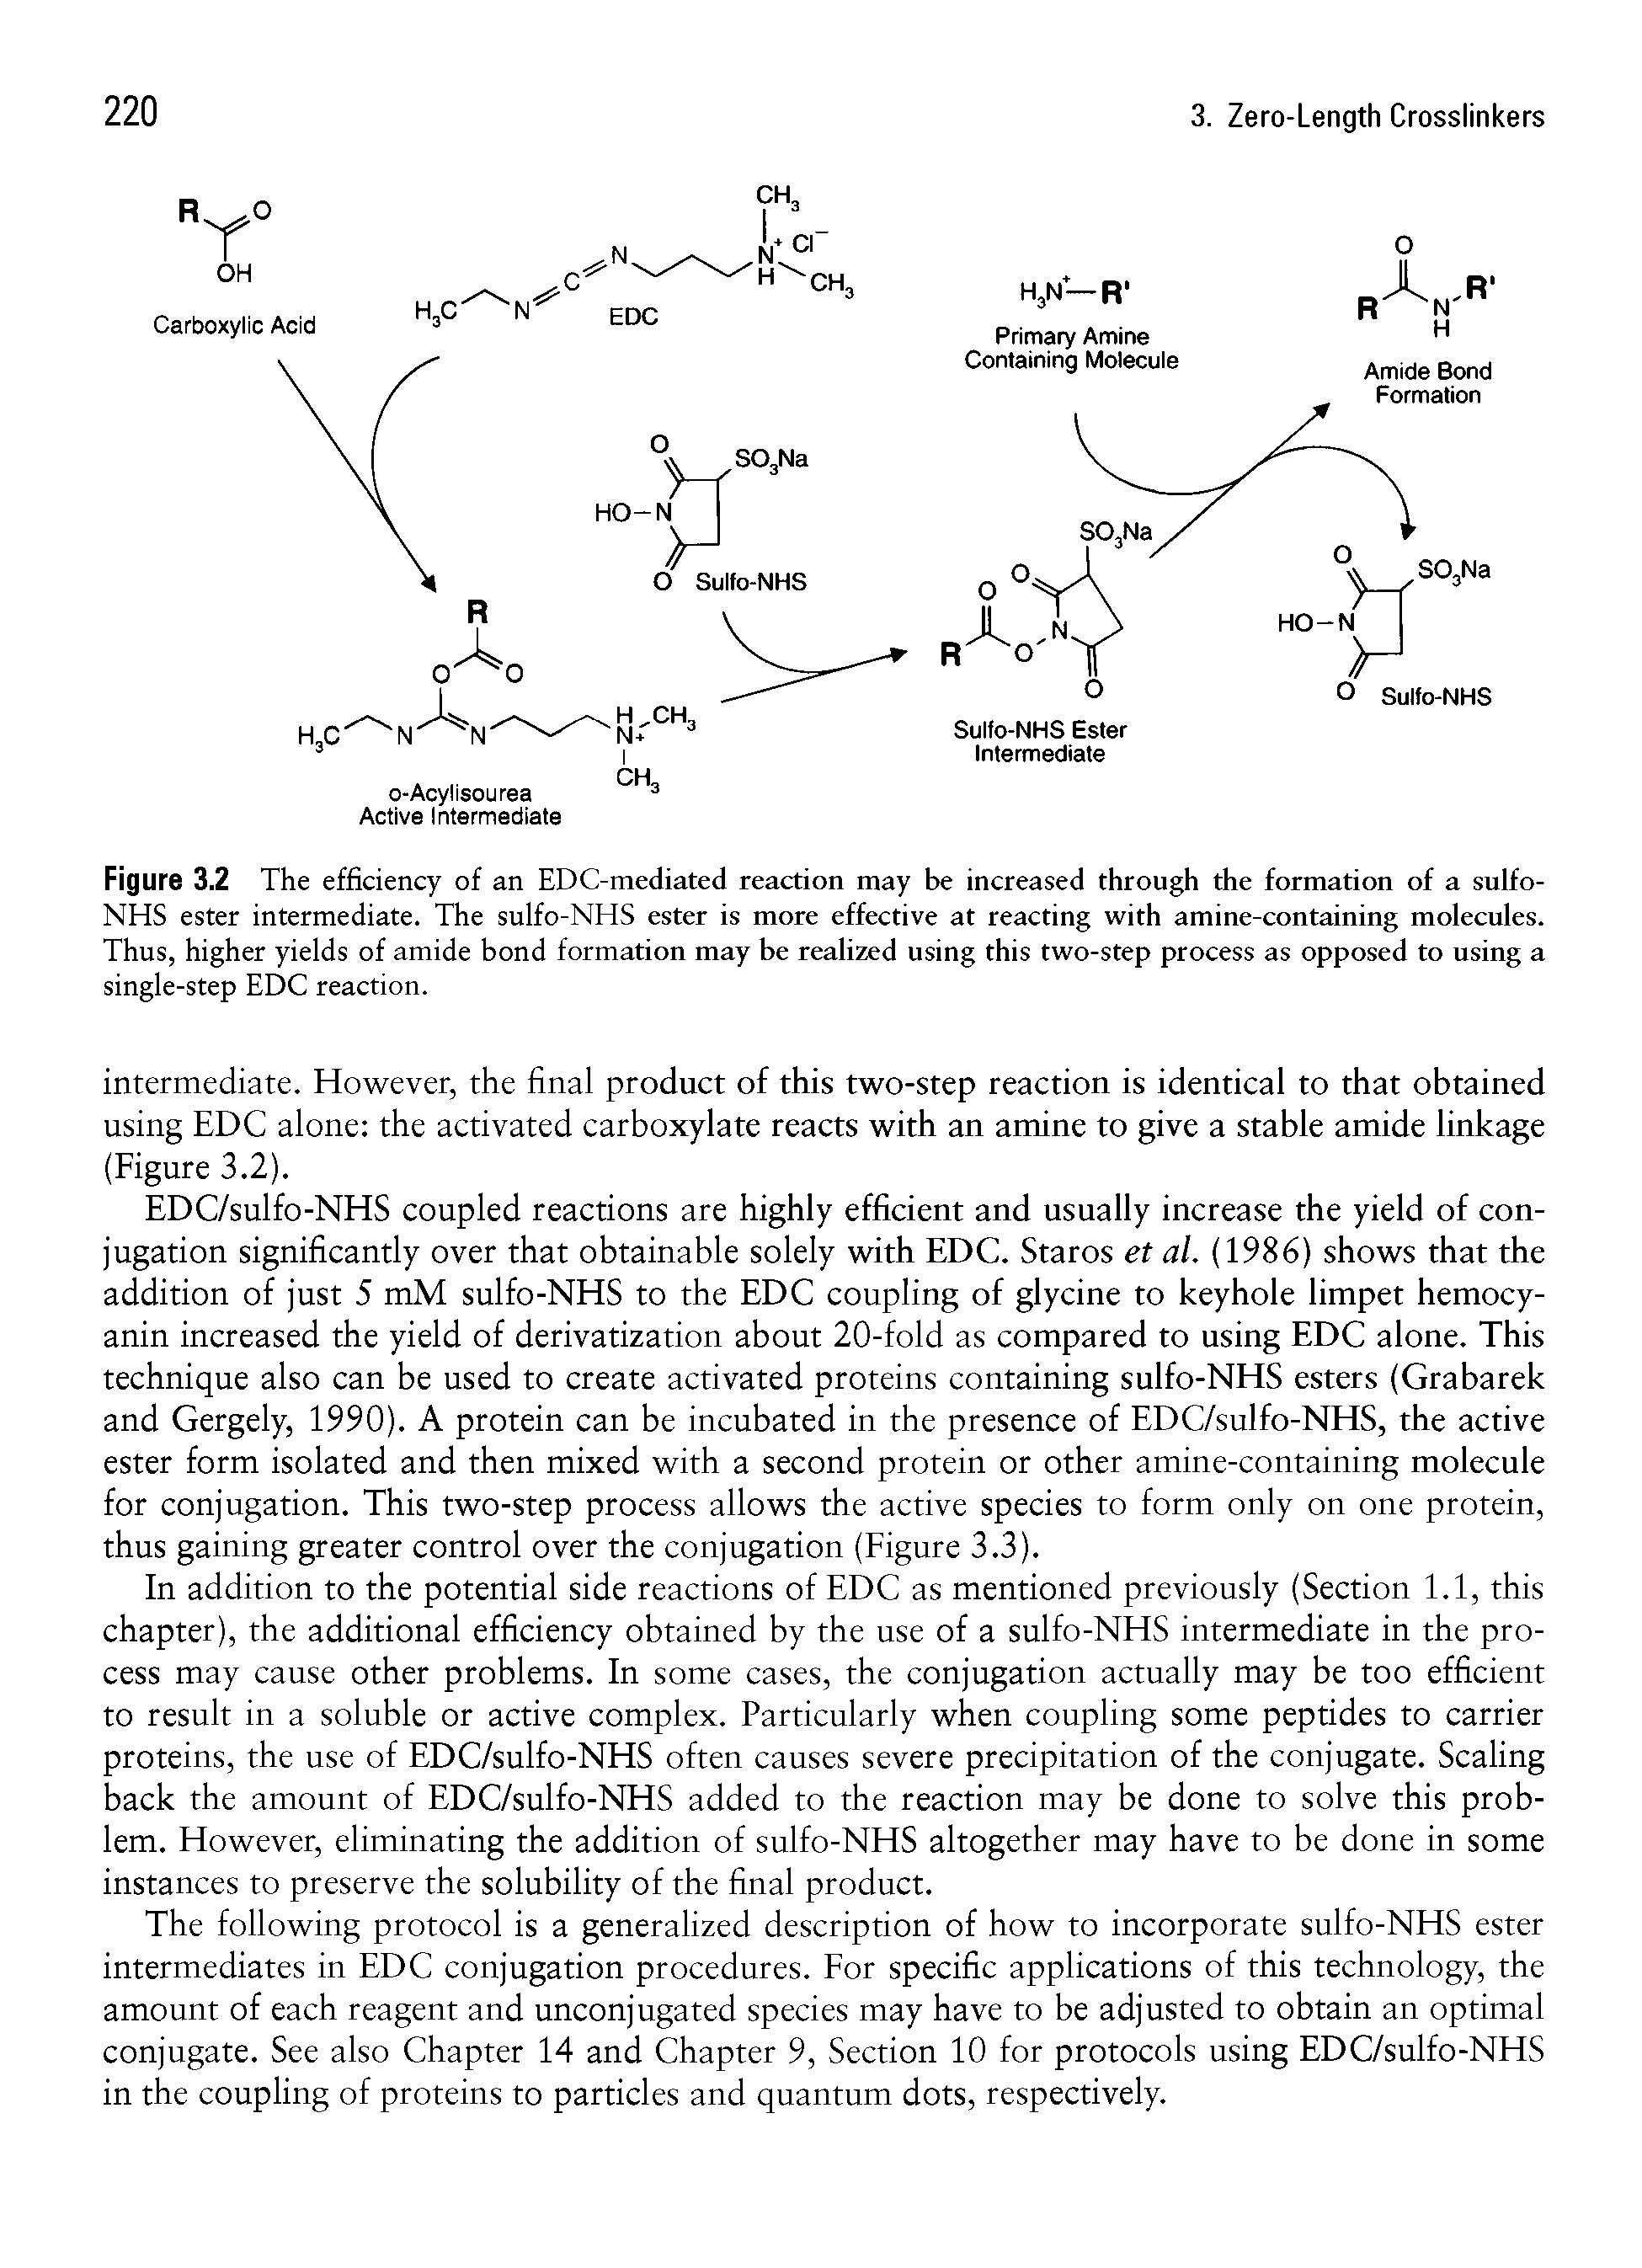 Figure 3.2 The efficiency of an EDC-mediated reaction may be increased through the formation of a sulfo-NHS ester intermediate. The sulfo-NHS ester is more effective at reacting with amine-containing molecules. Thus, higher yields of amide bond formation may be realized using this two-step process as opposed to using a single-step EDC reaction.